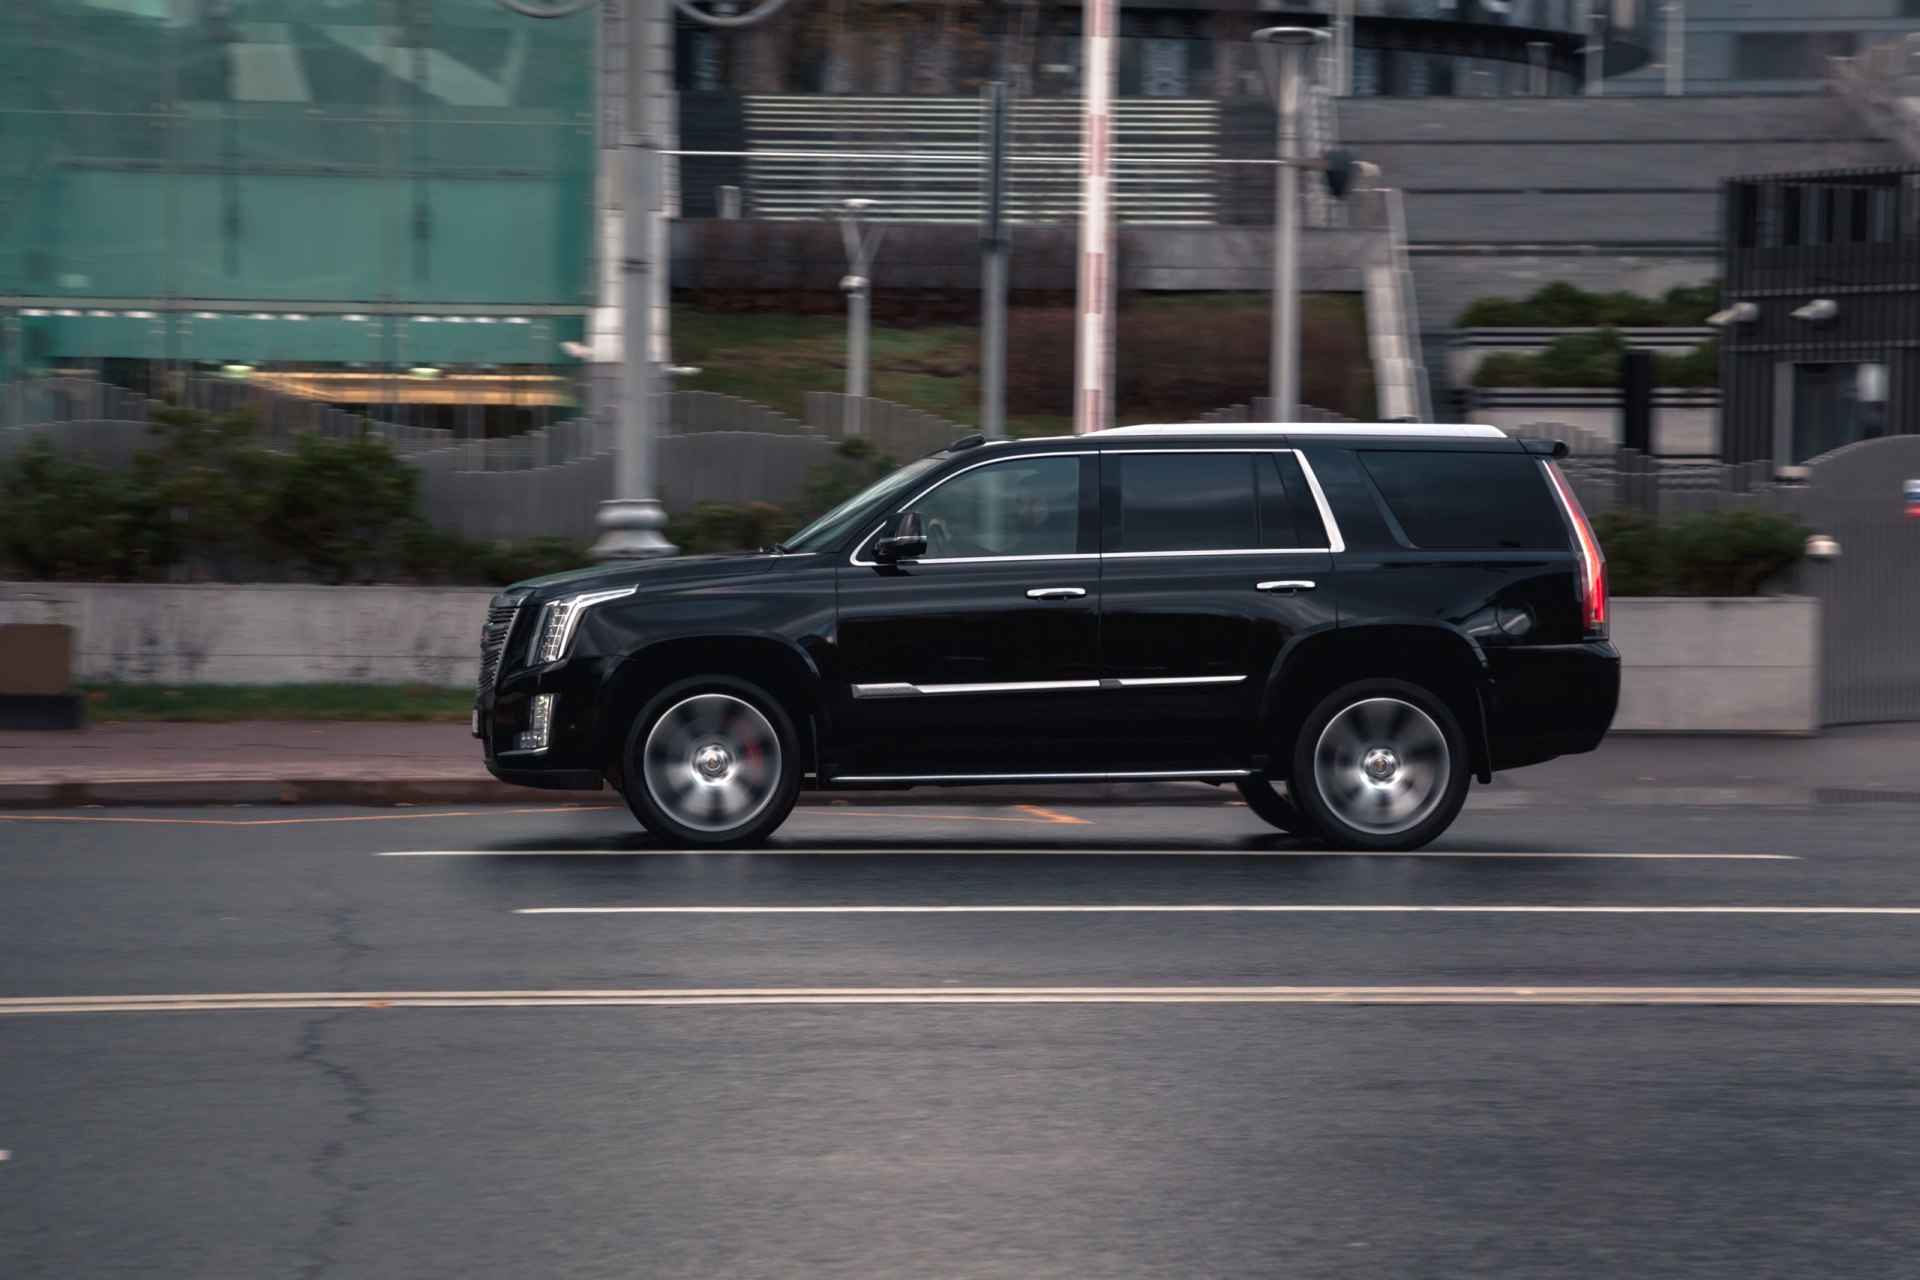 Fast moving Cadillac Escalade on the city road. Fast motion with blurred background.